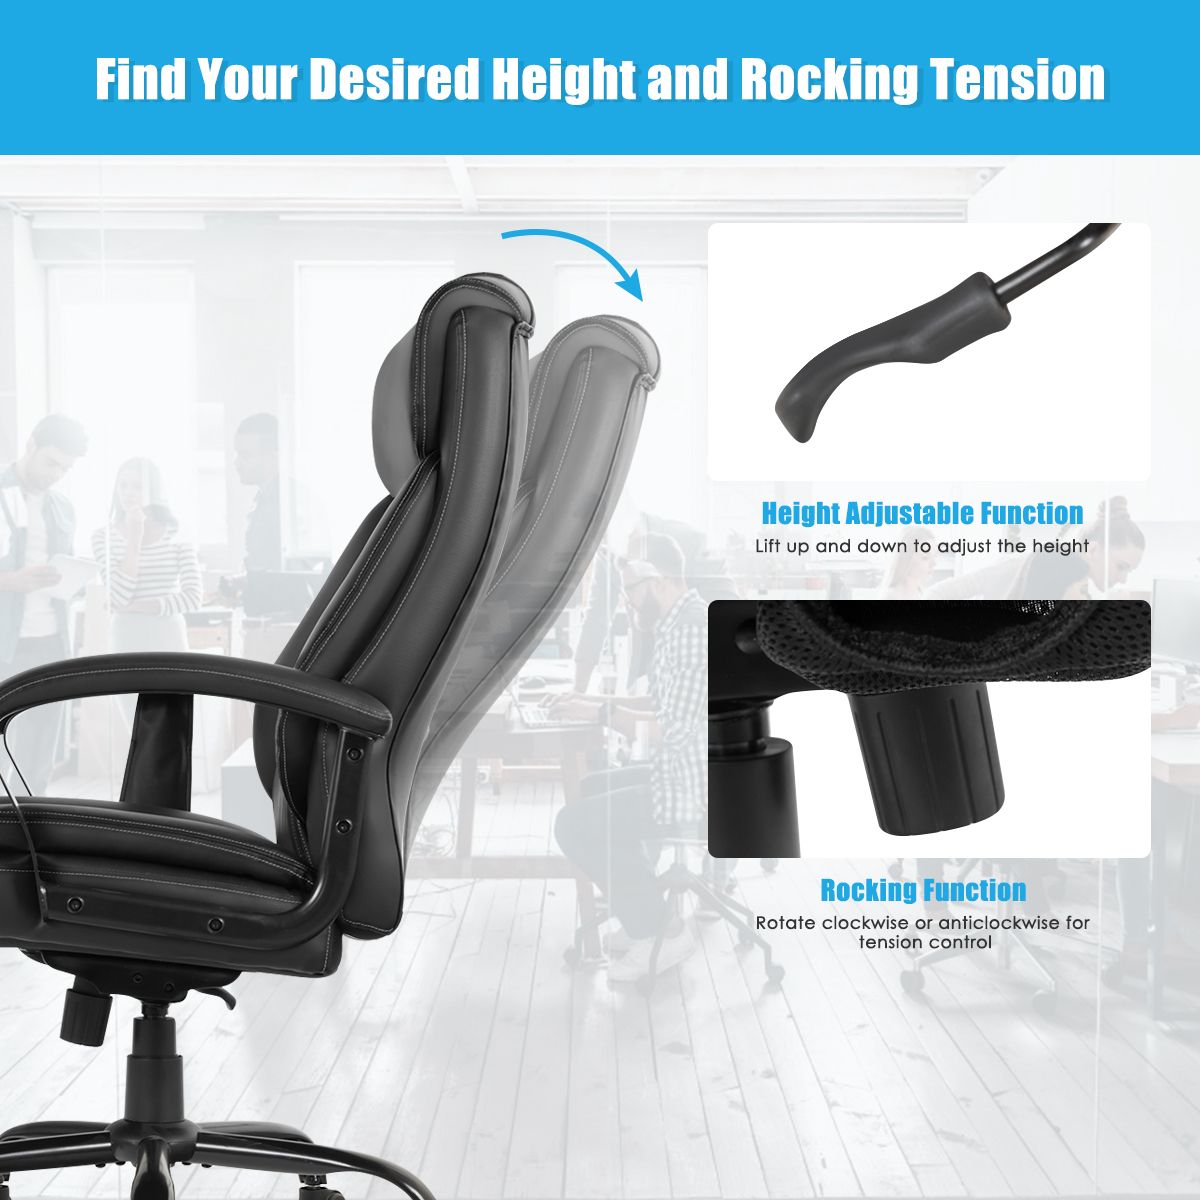 Executive Chair with 6 Point Massage and Adjustable High Back